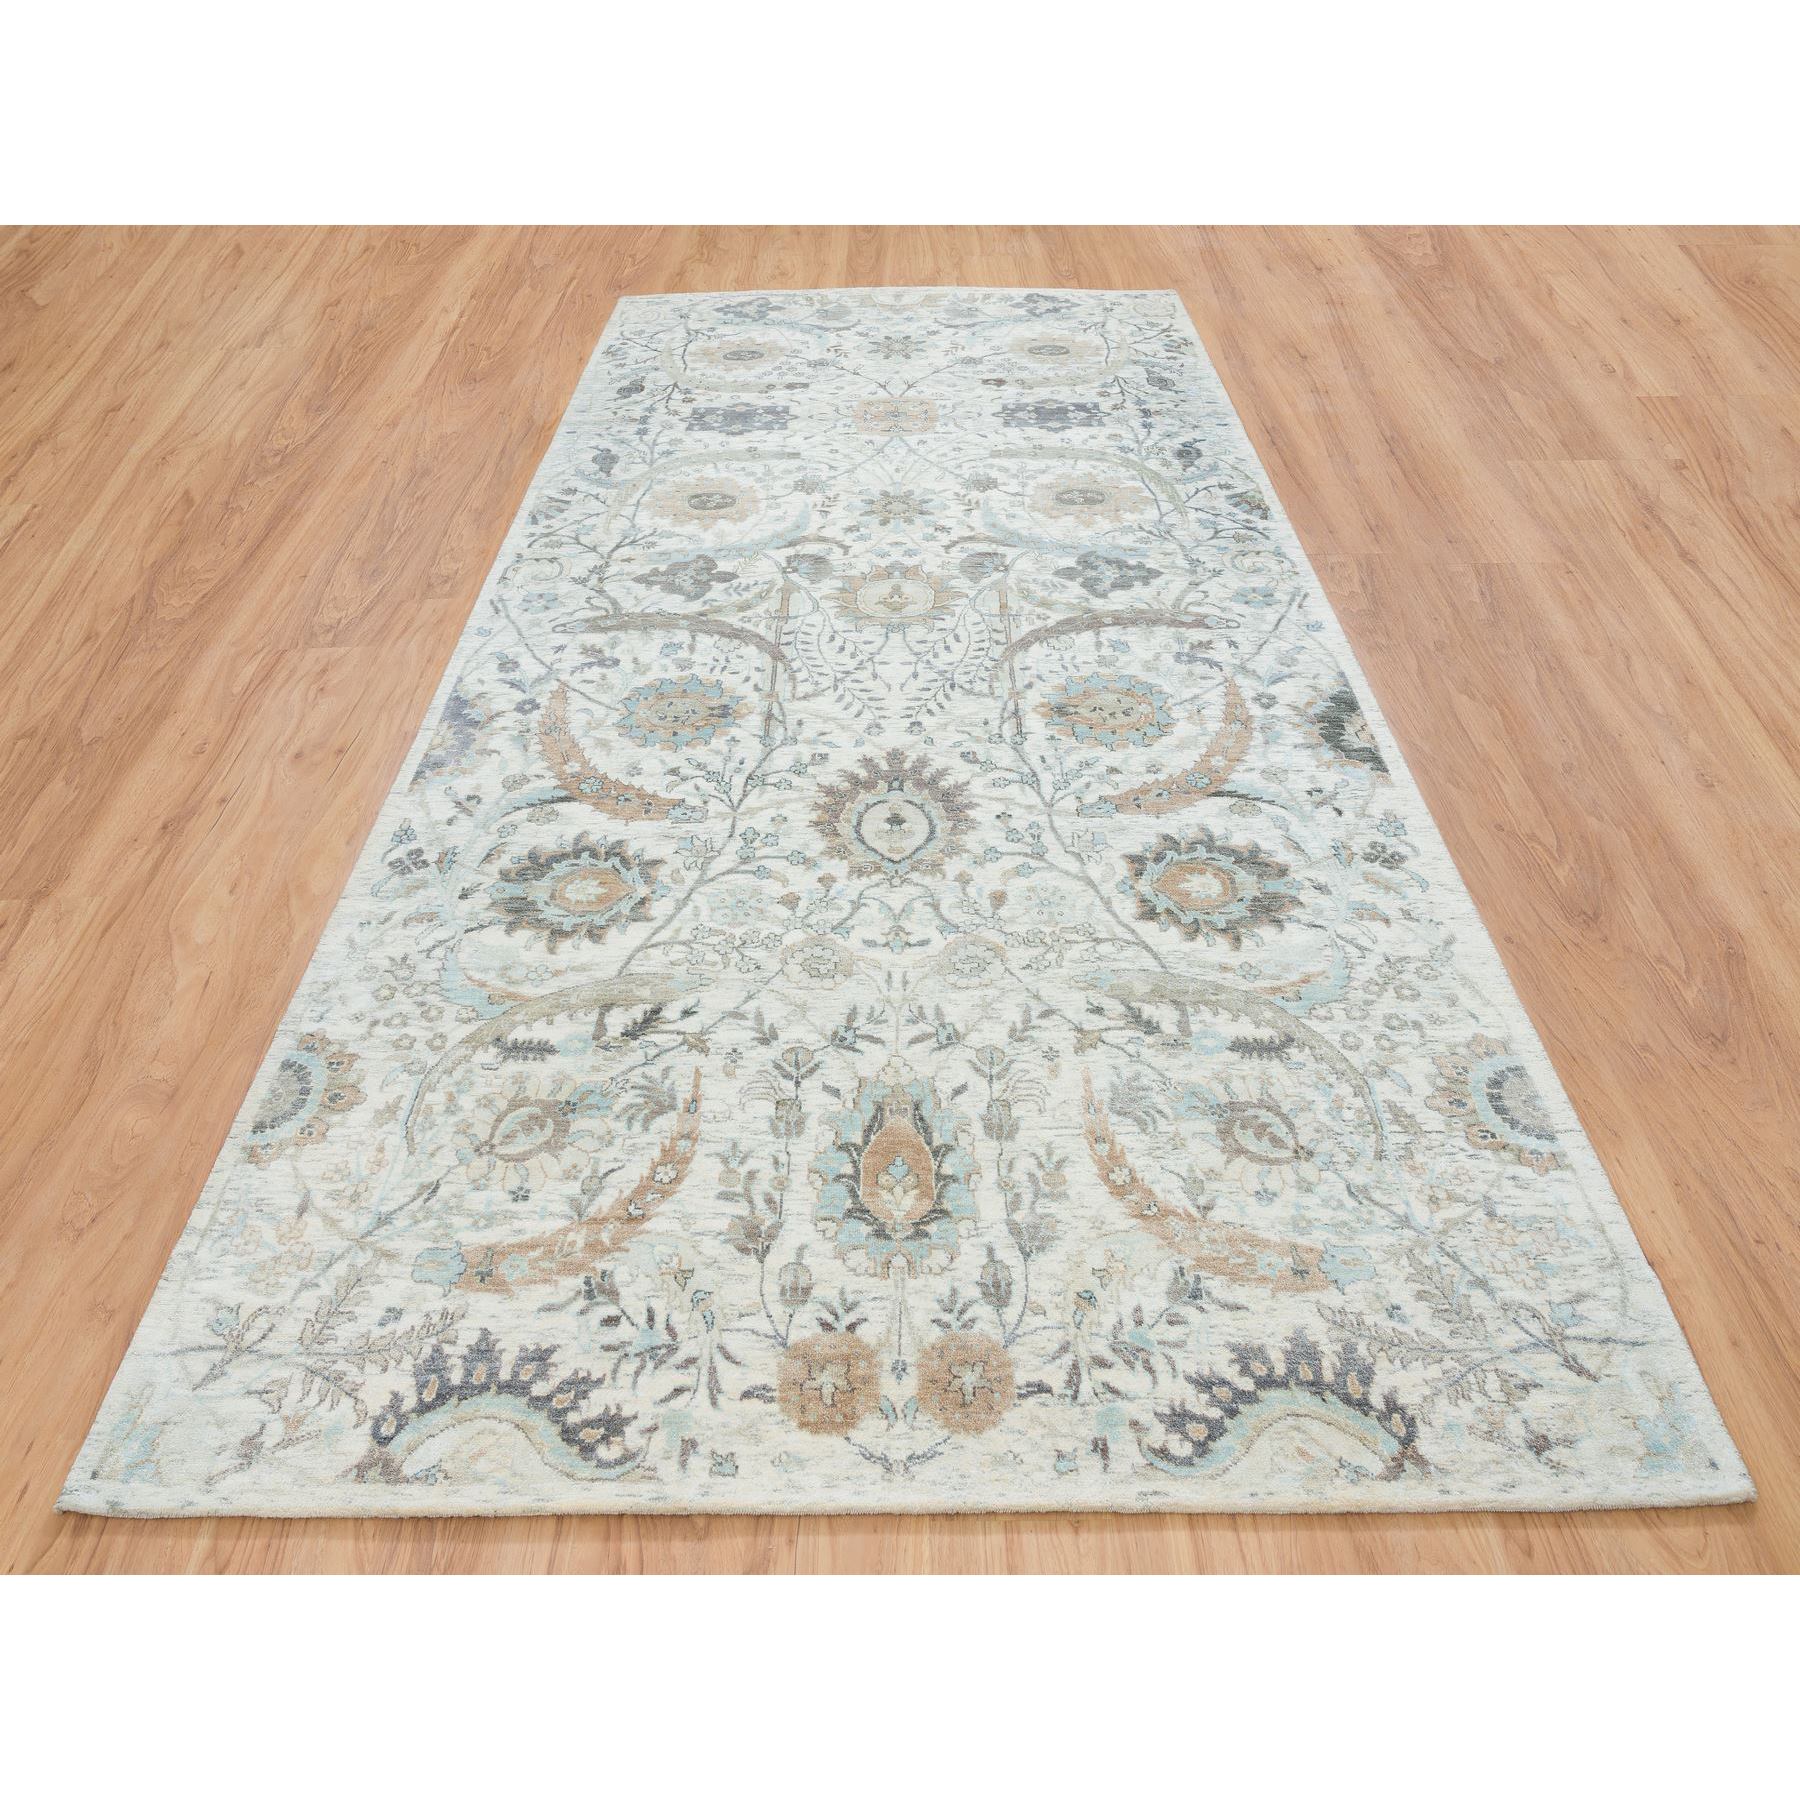 6'1"x12' Ivory, Sickle Leaf Design Soft Pile, Silk With Textured Wool Hand Woven, Gallery Size Runner Oriental Rug 